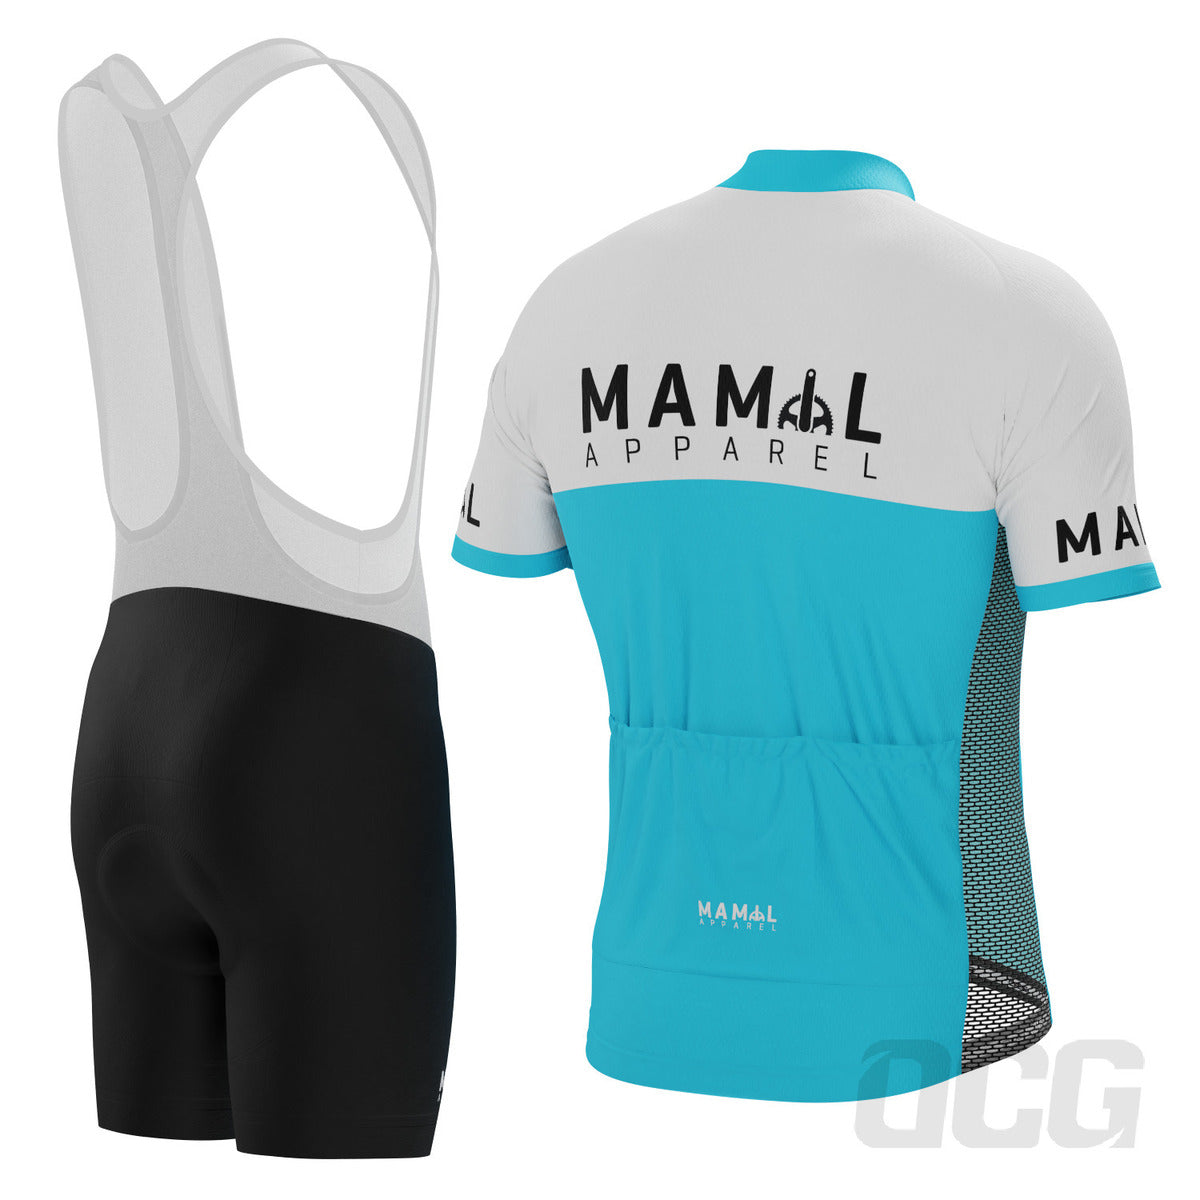 Men's MAMIL Apparel Dimensions 2 Piece Cycling Kit